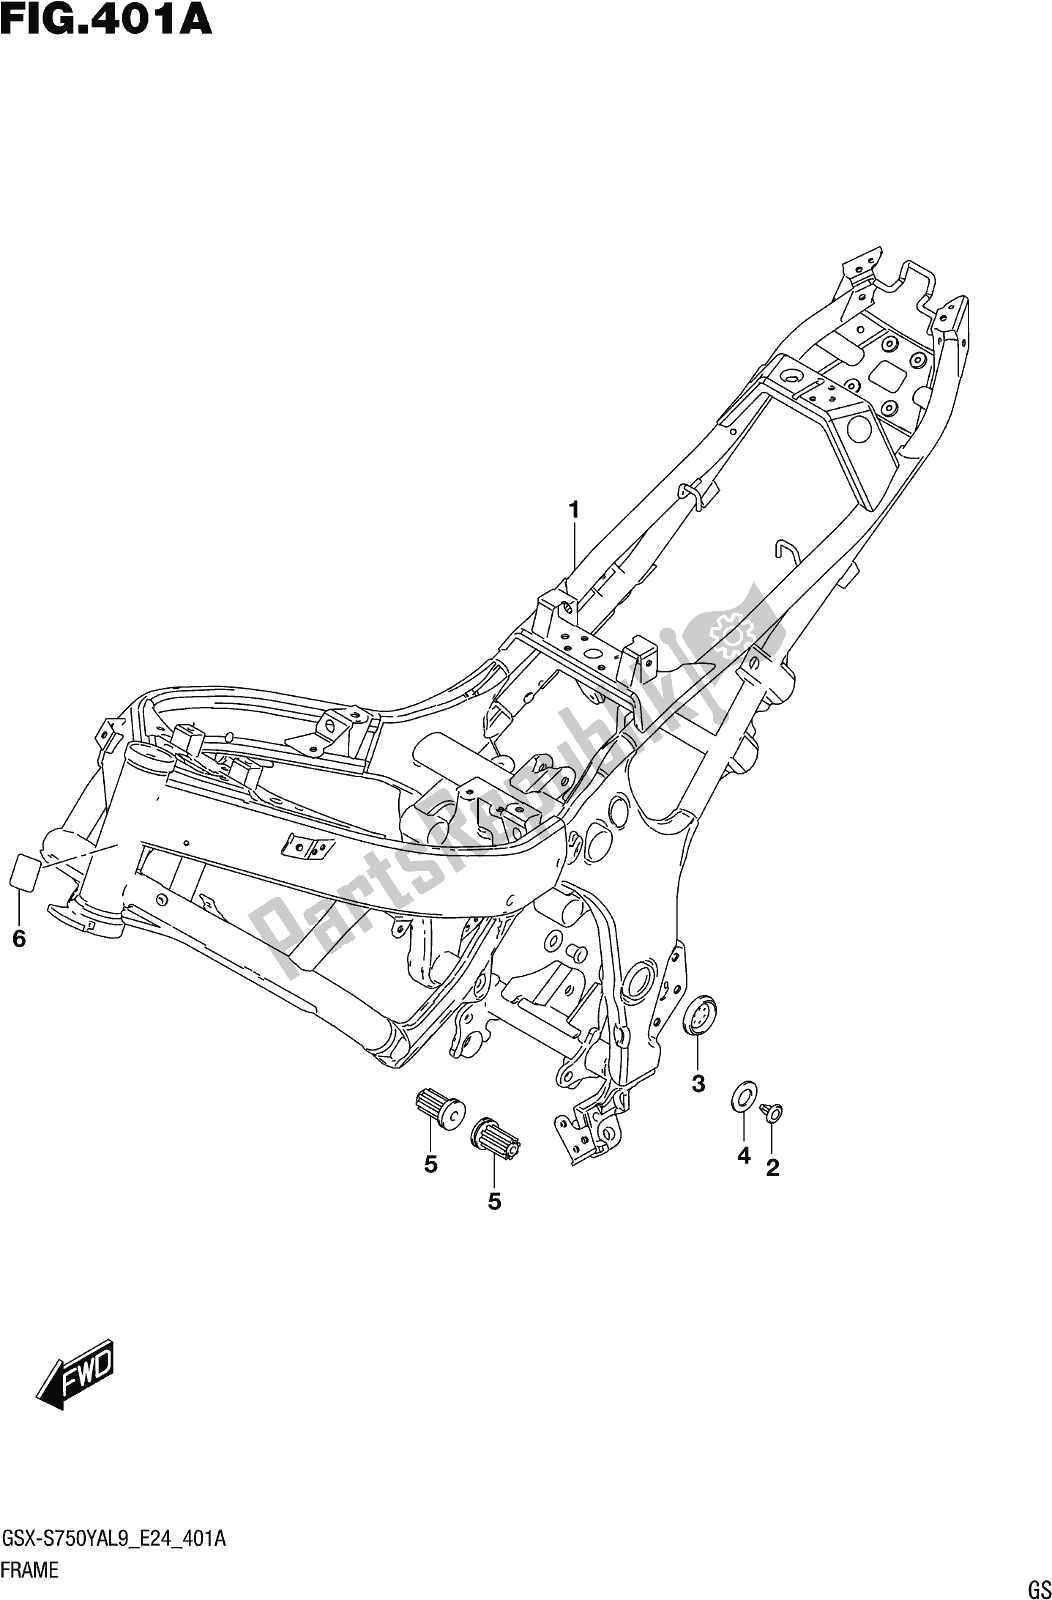 All parts for the Fig. 401a Frame of the Suzuki Gsx-s 750 ZA 2019